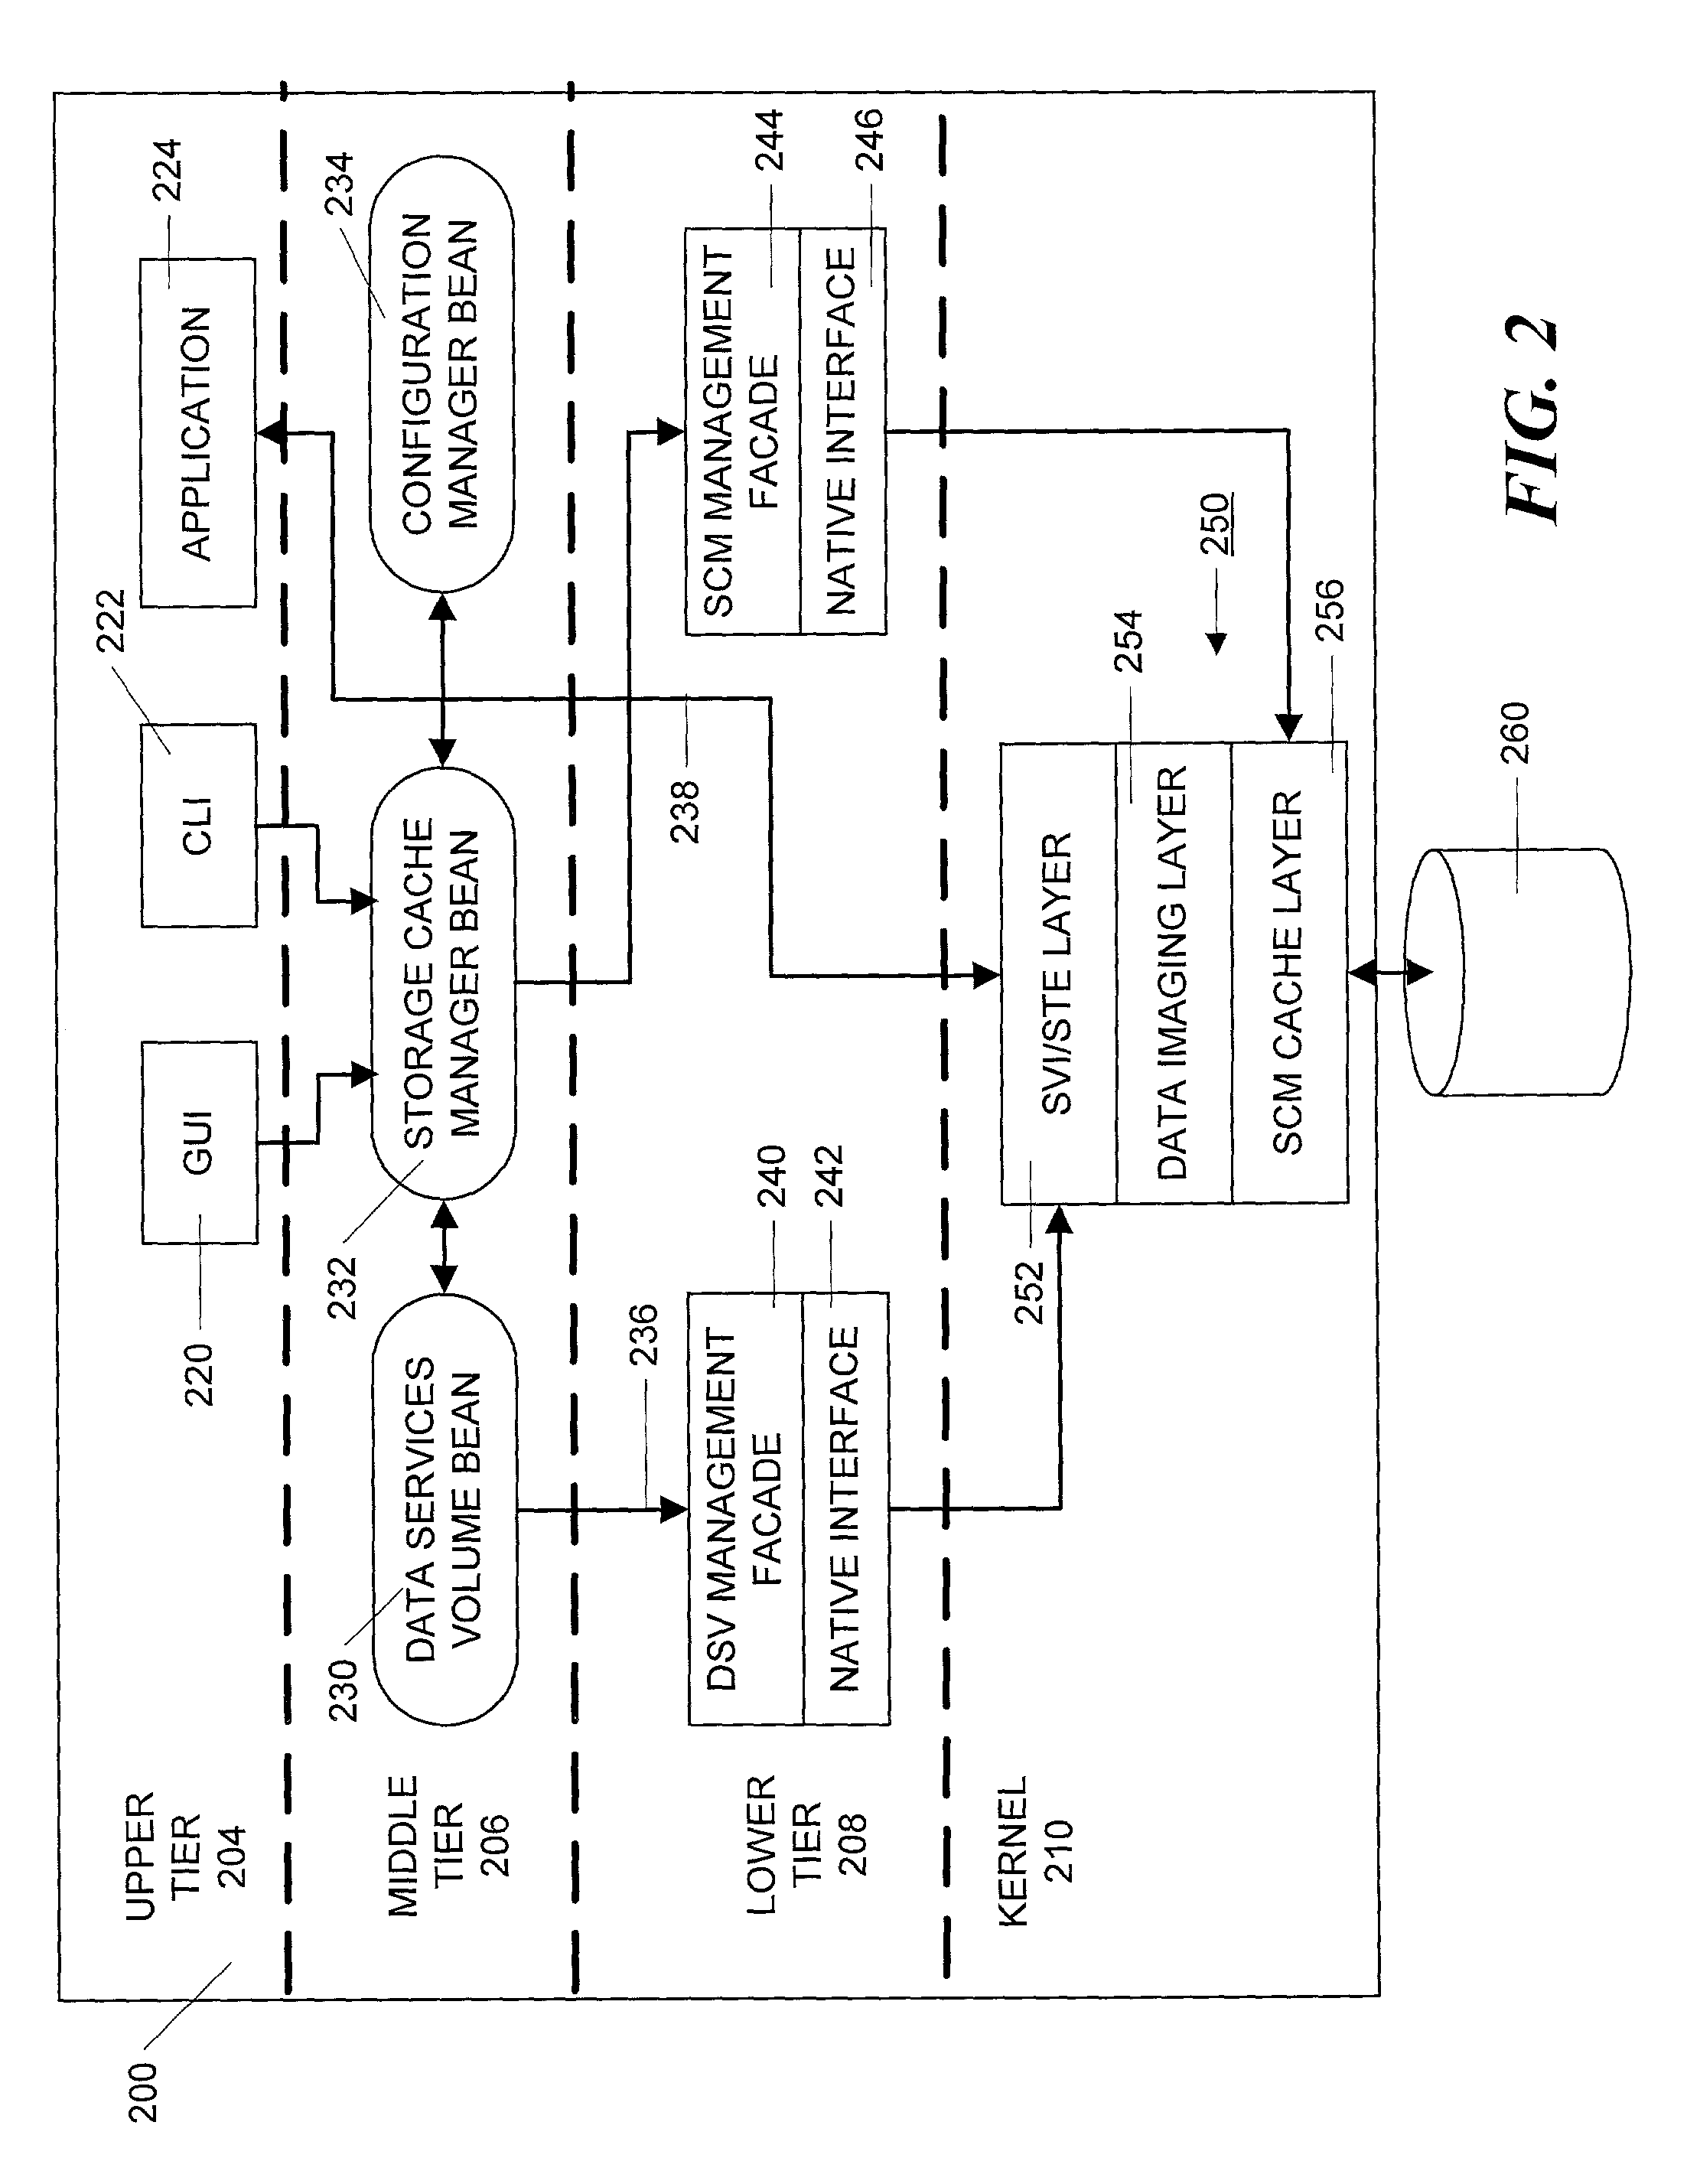 Method and apparatus for managing data caching in a distributed computer system